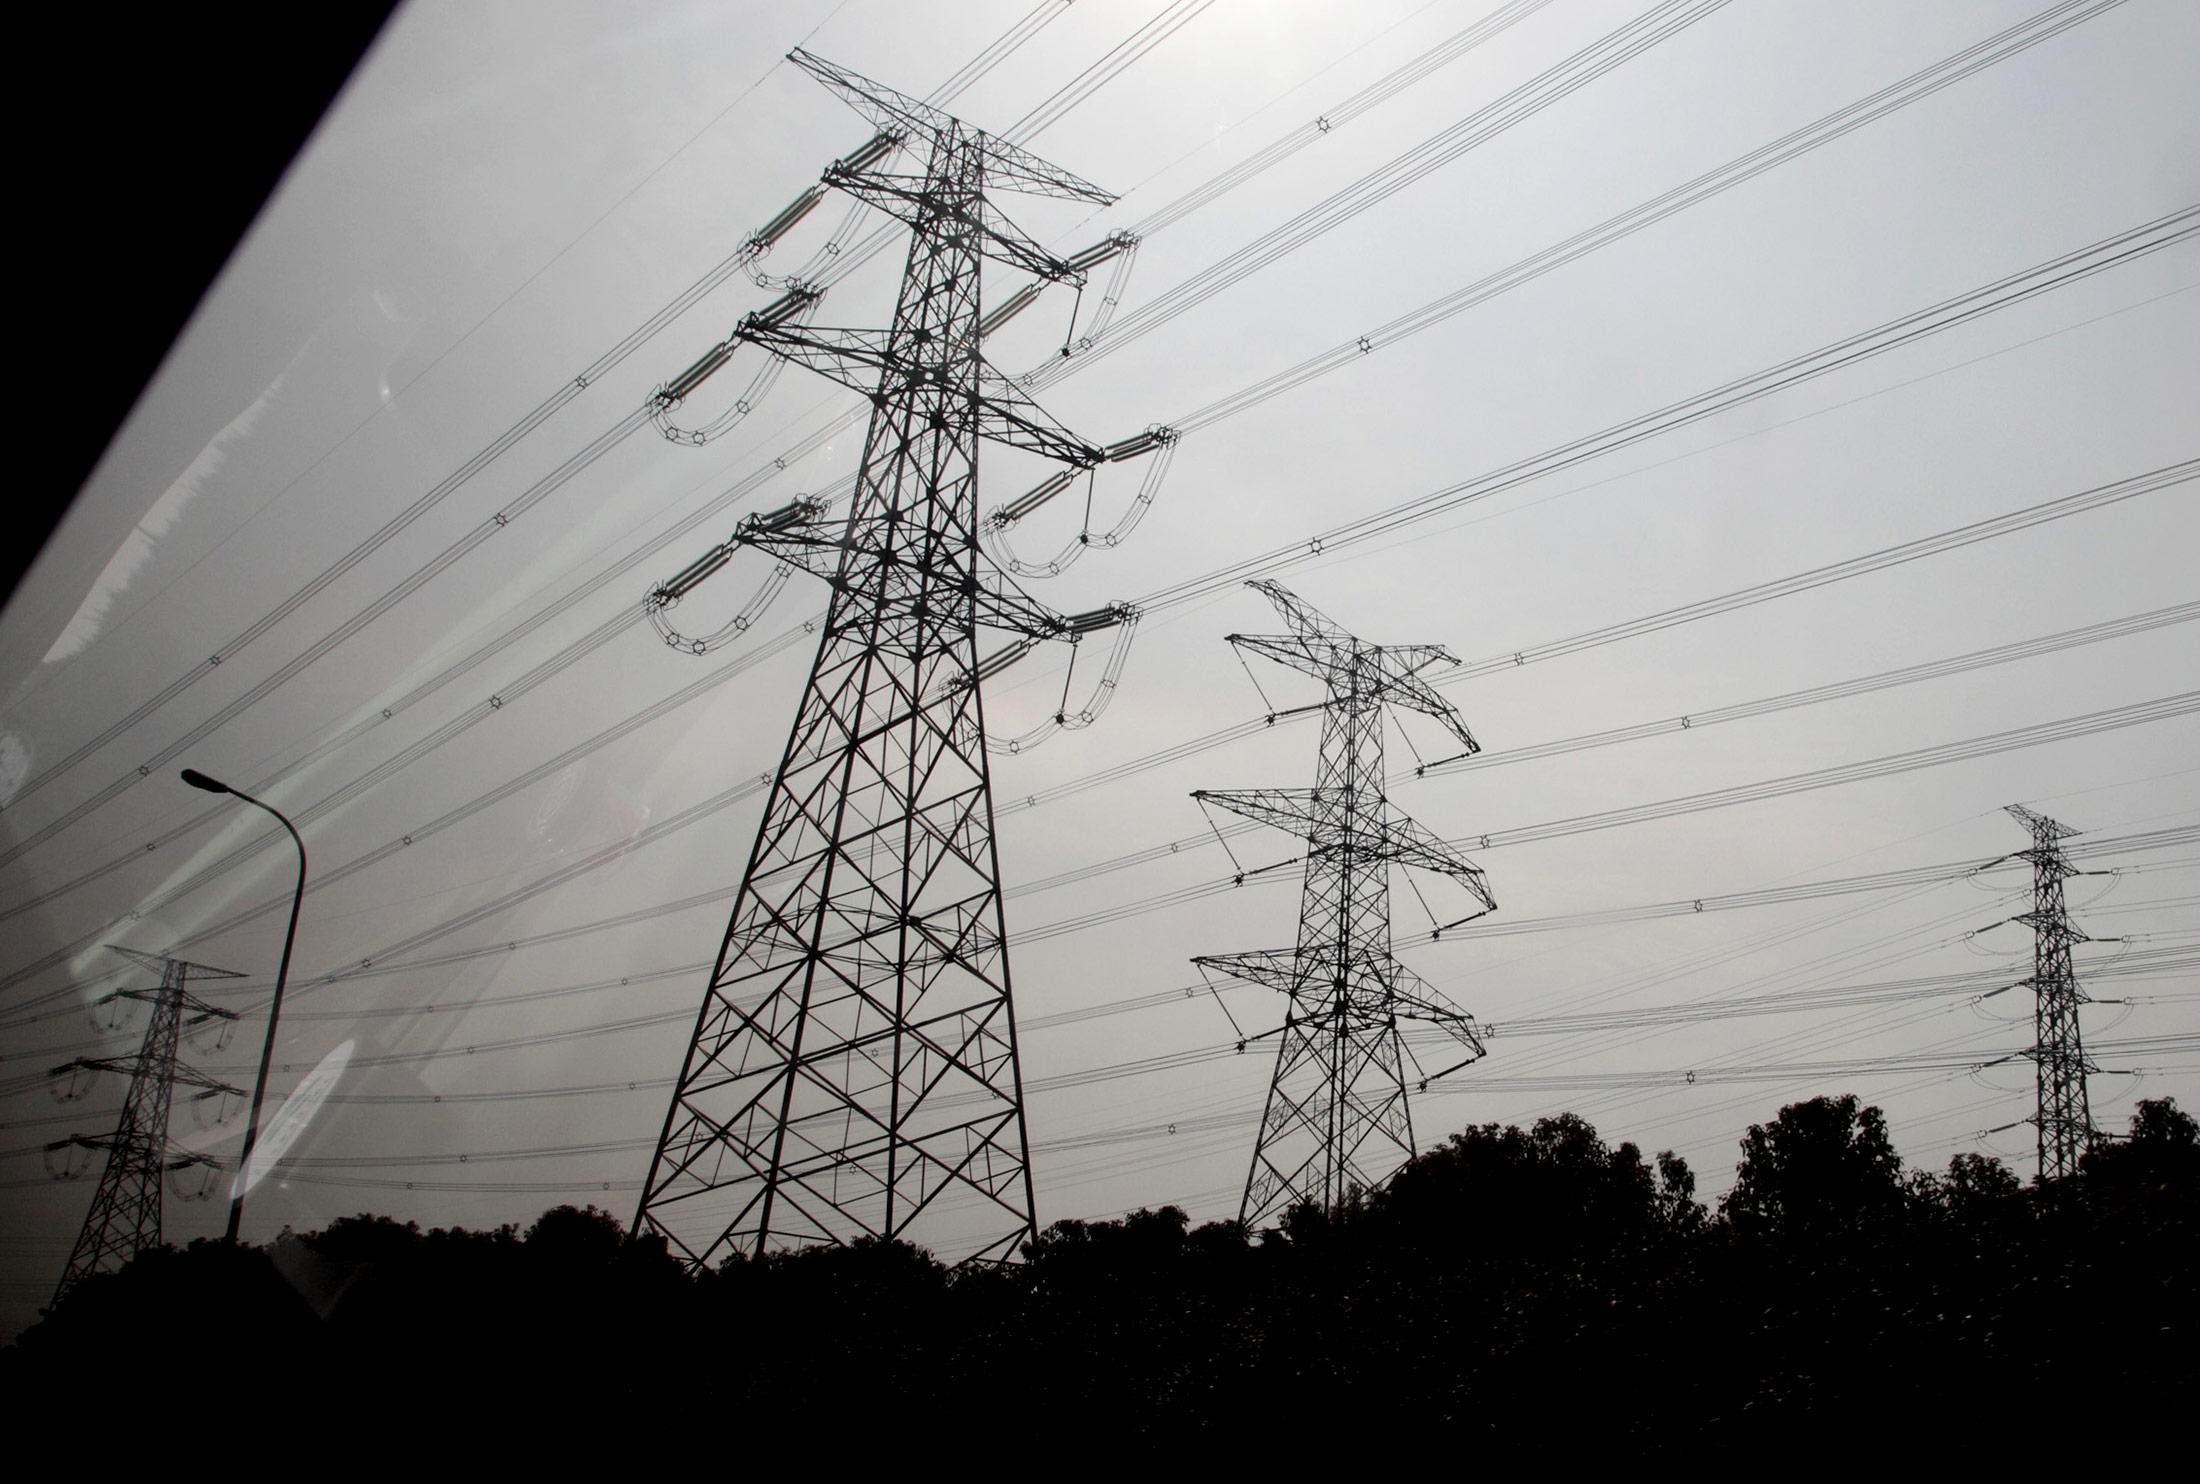 Electricity pylons are seen from a car window near the Yangshan Deep Water Port in Shanghai, China, on Thursday, Jan. 31, 2013. China's economic growth accelerated for the first time in two years as government efforts to revive demand drove a rebound in industrial output, retail sales and the housing market.
